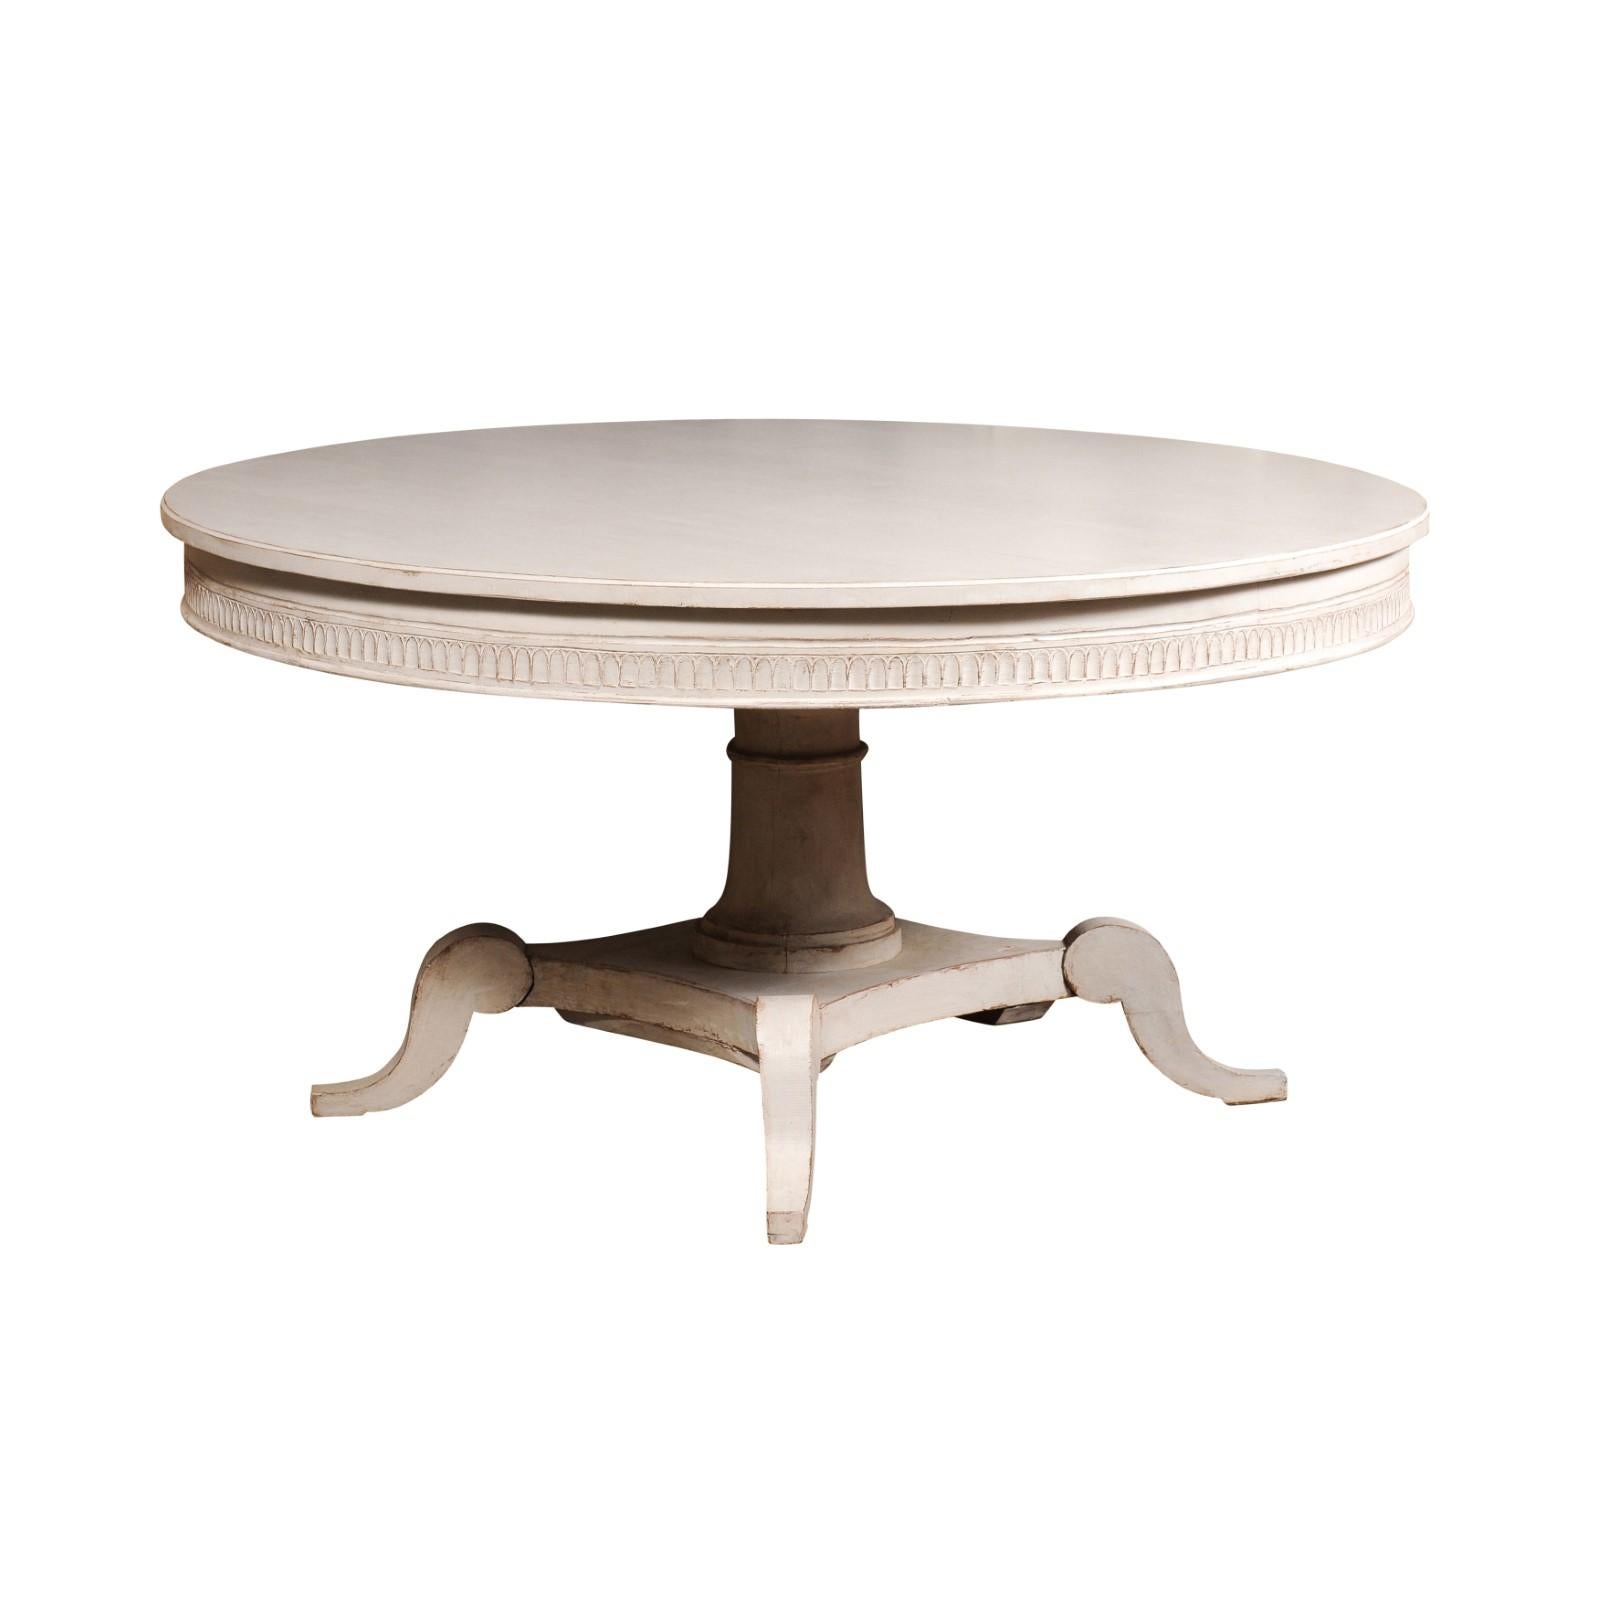 A Swedish round top dining table from the 19th century with classic light gray painted finish, carved frieze, pedestal and carved quadripod base. From the heart of 19th-century Scandinavia comes this exquisitely designed Swedish round-top dining